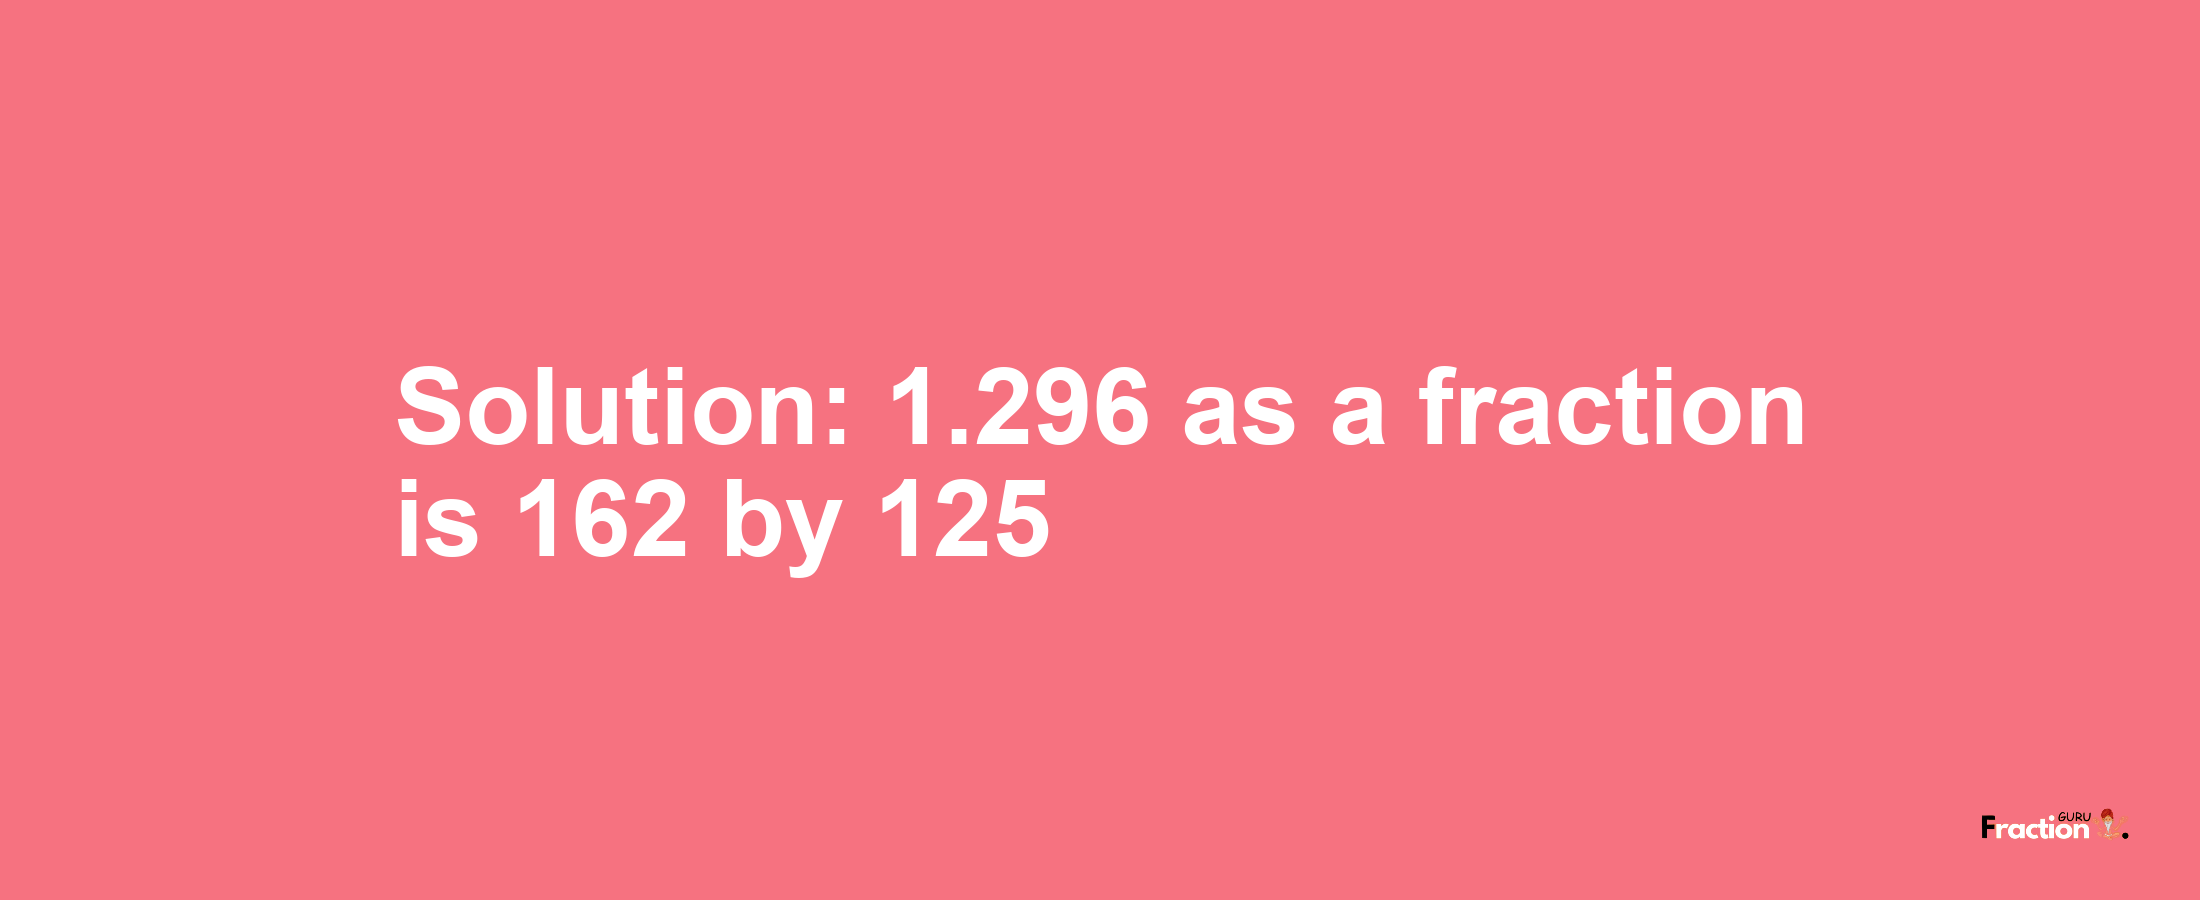 Solution:1.296 as a fraction is 162/125